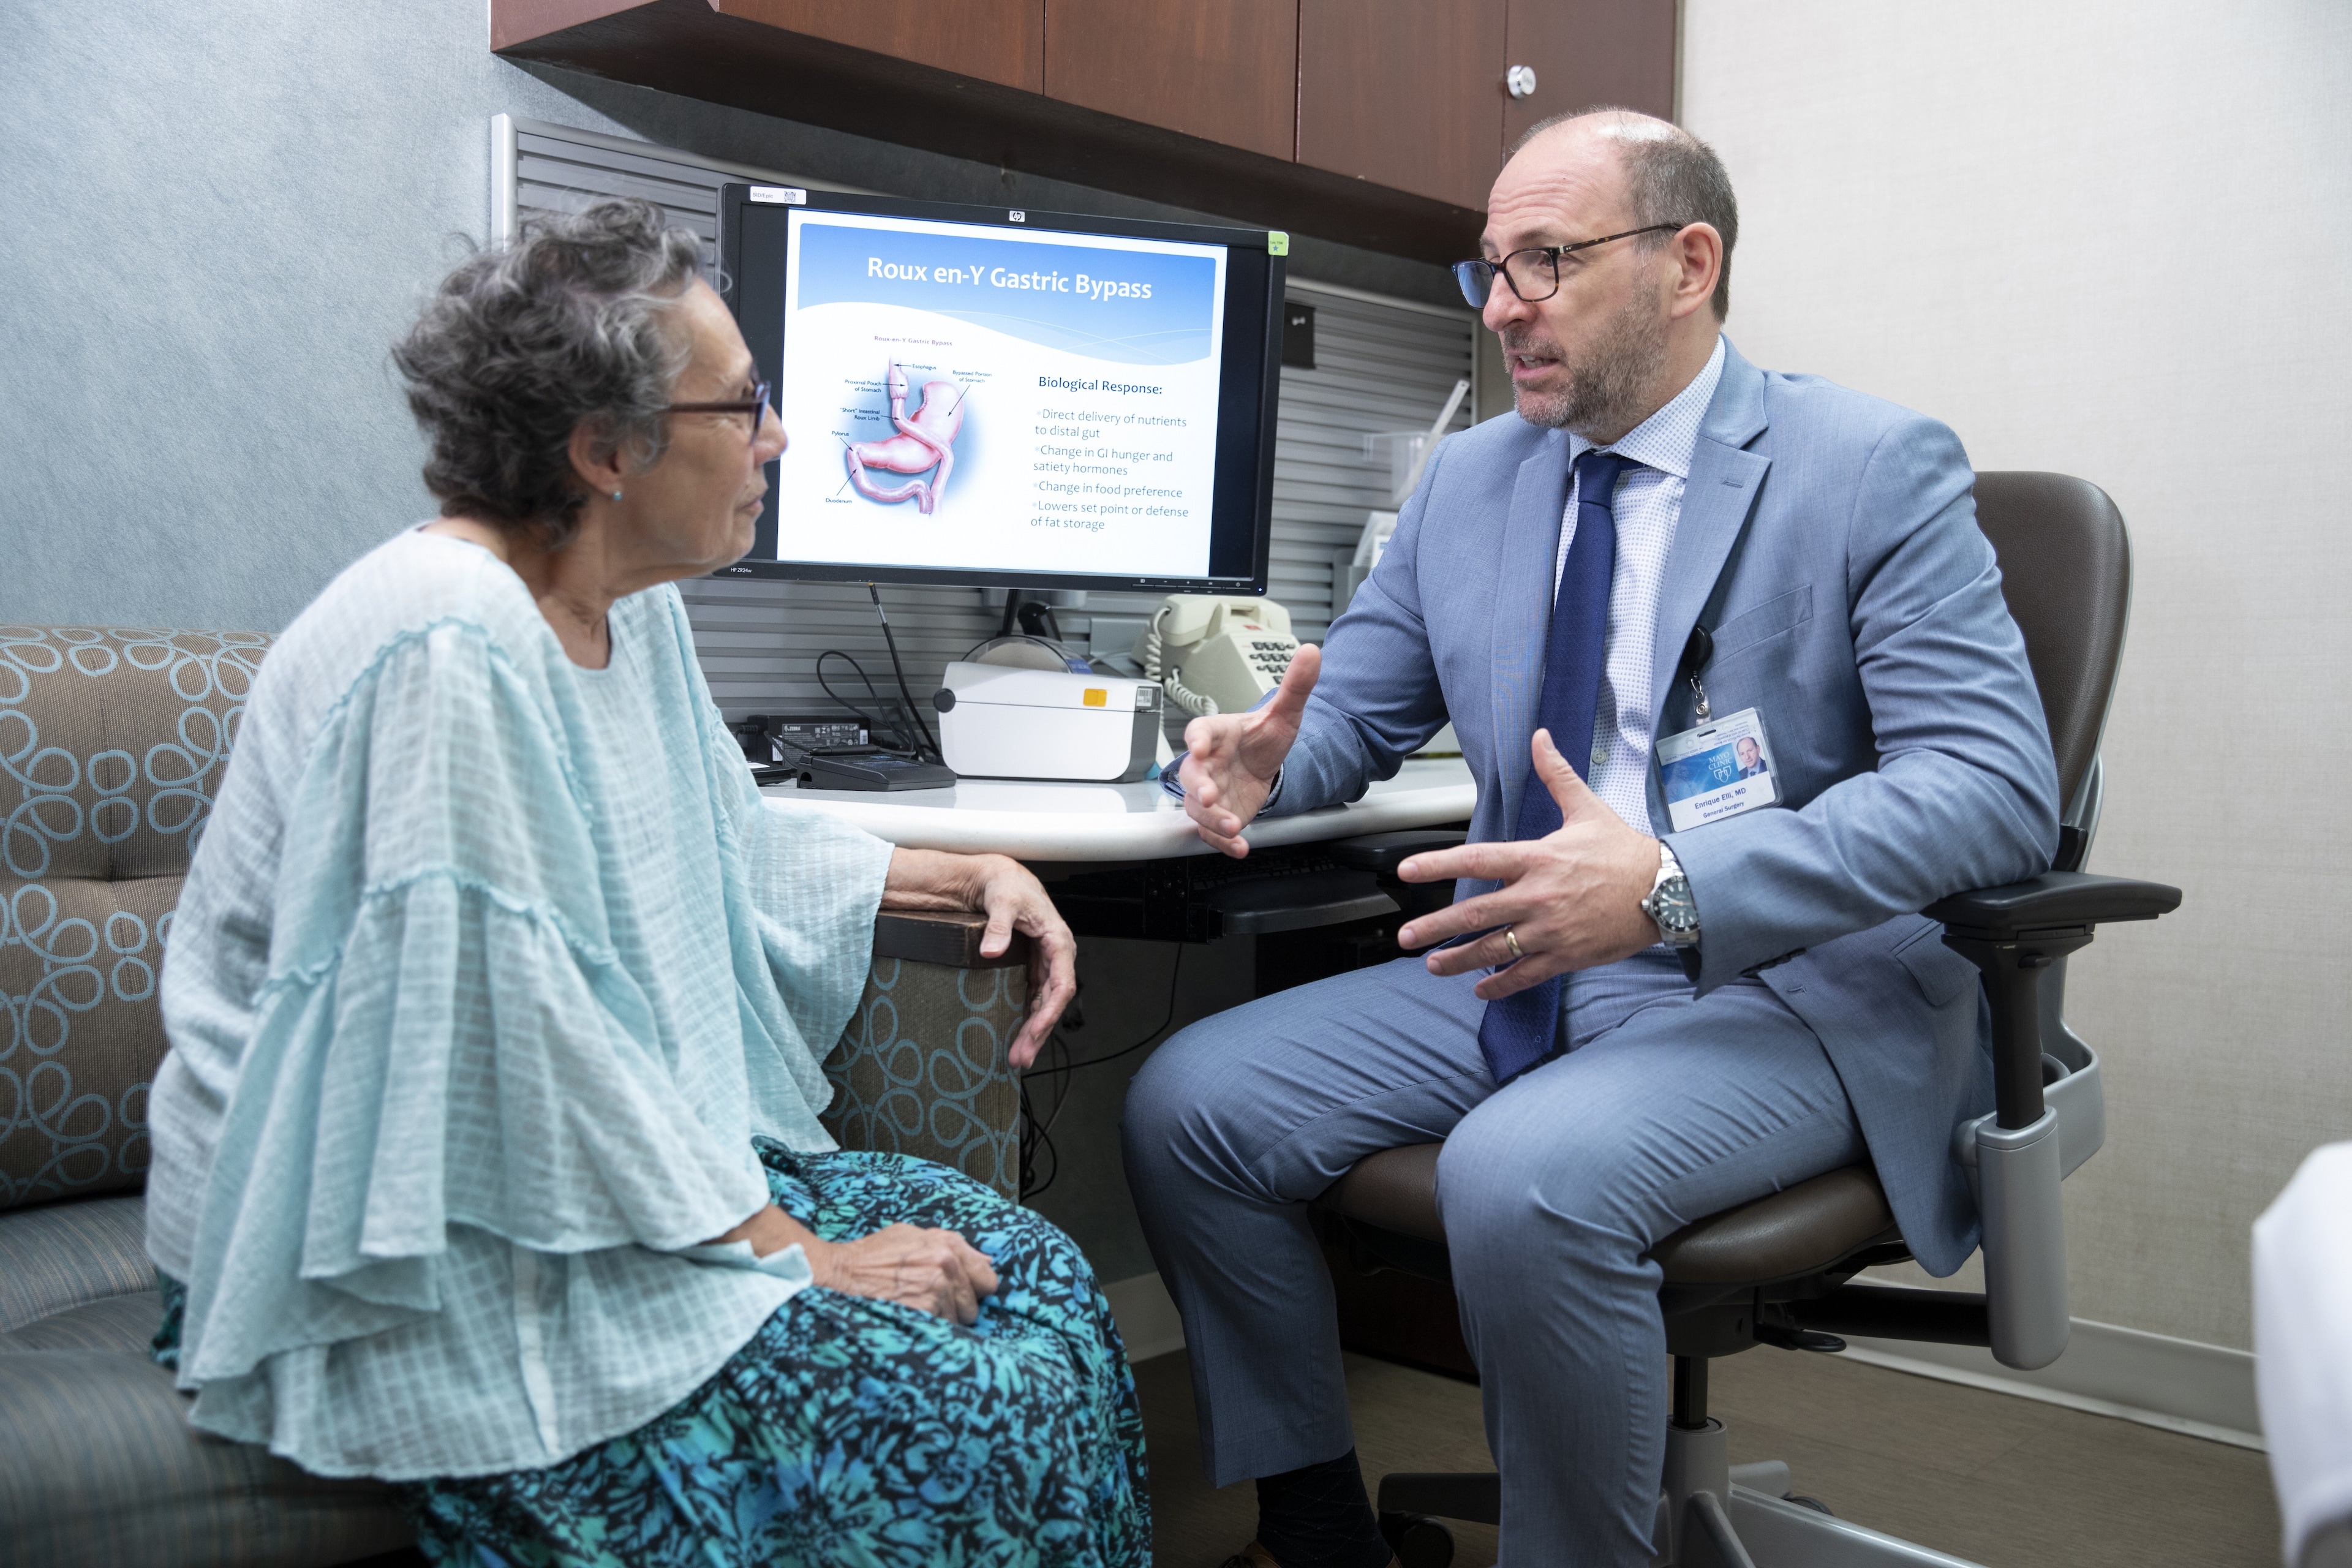 A doctor at the Bariatric Center in Florida further discusses care options with a patient.